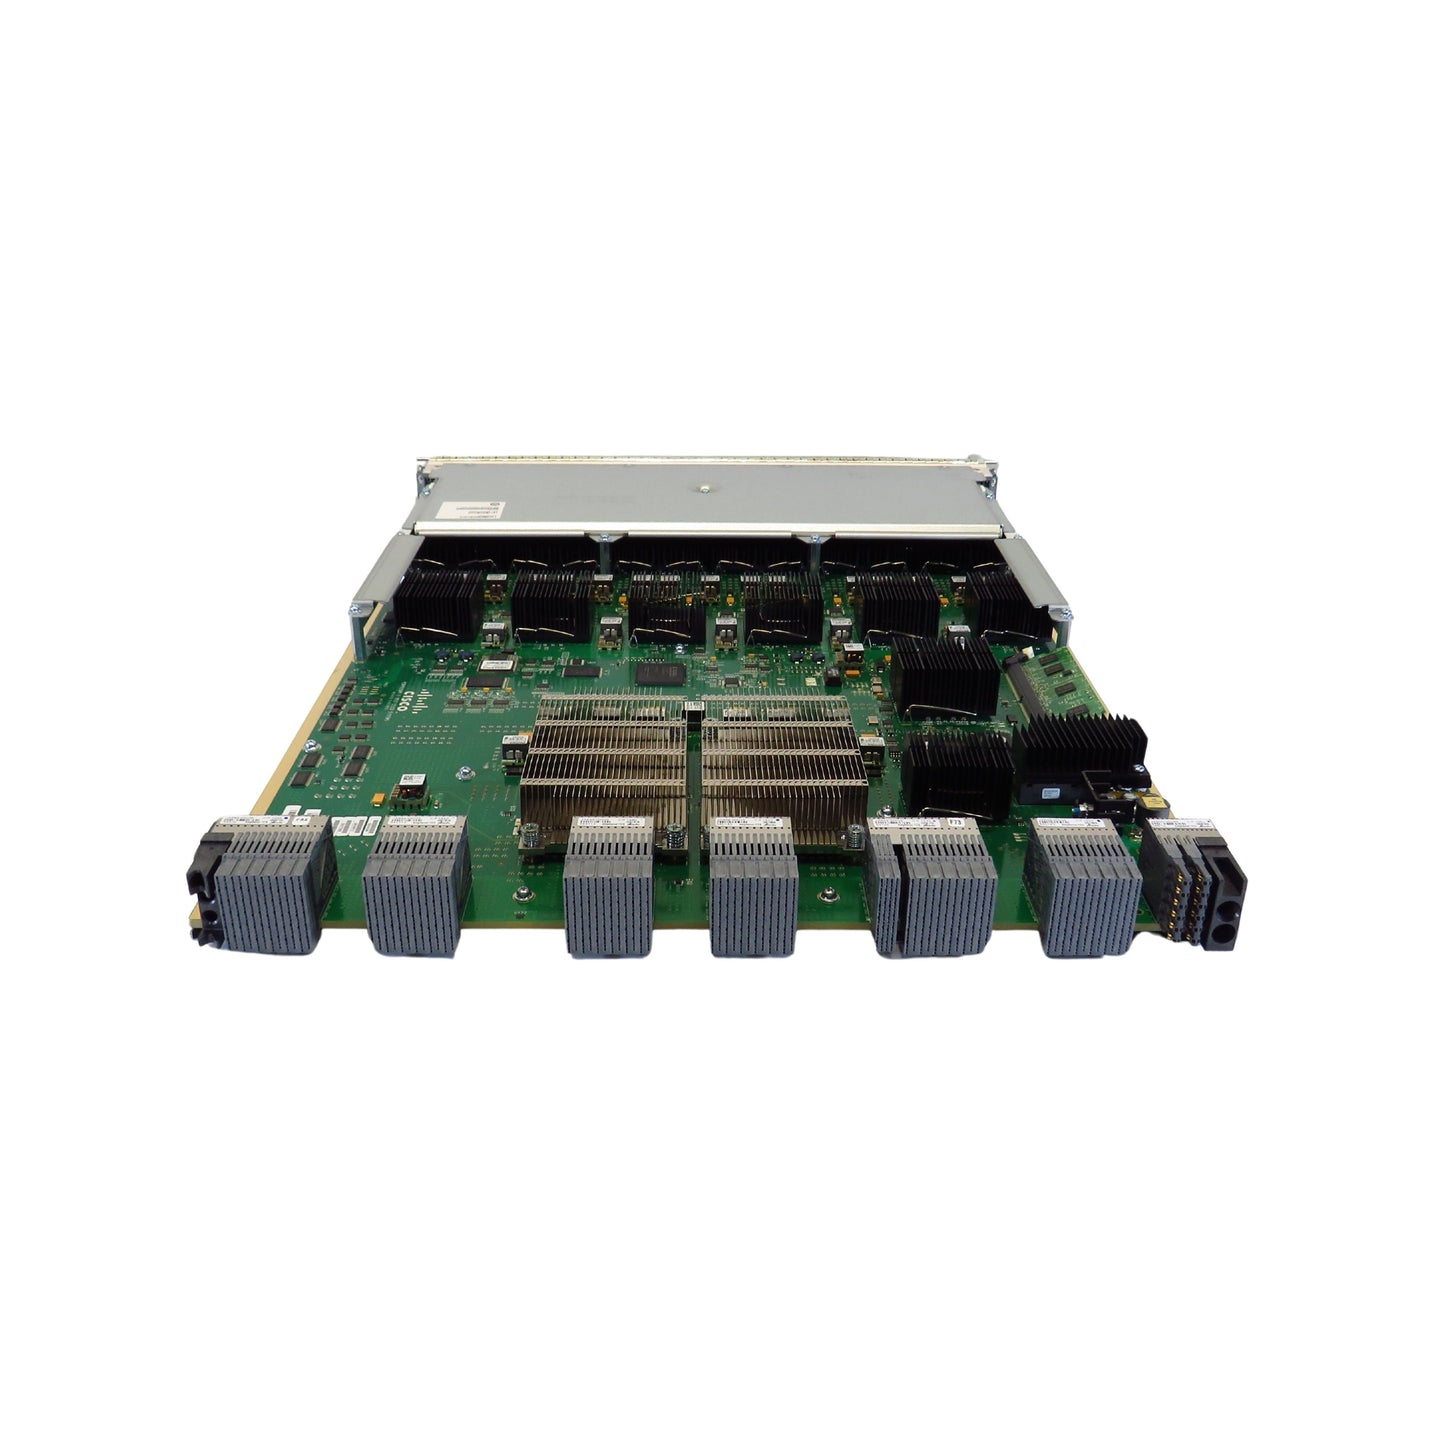 Cisco DS-X9448-768K9 48-Port 16-Gbps Fibre Channel Switching Module (Refurbished)